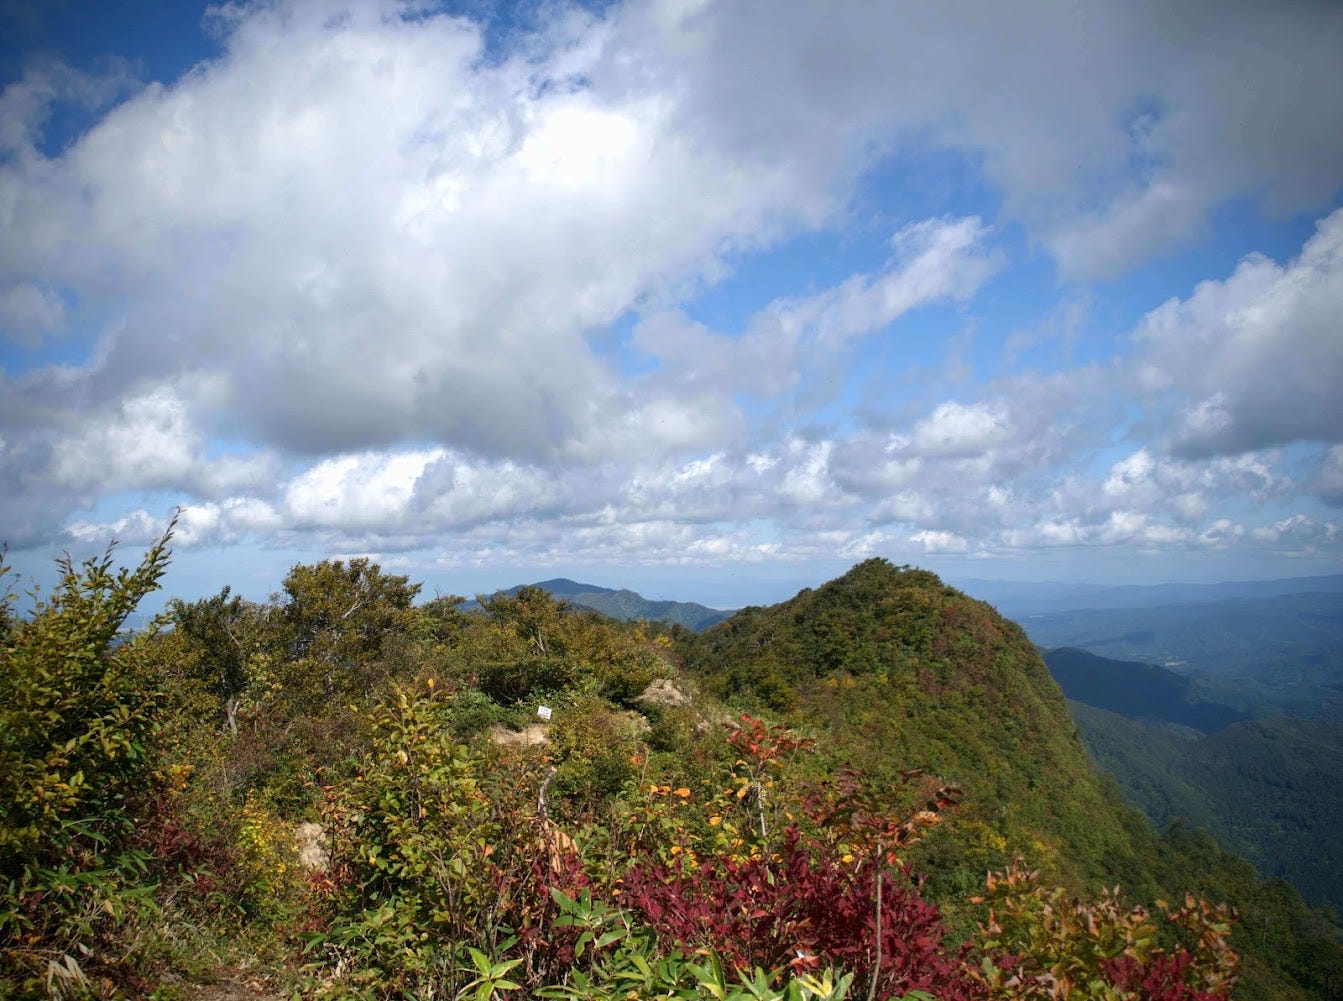 The mountains surrounding the summit of Mt. Maya stick up in the bright blue autumn sky.